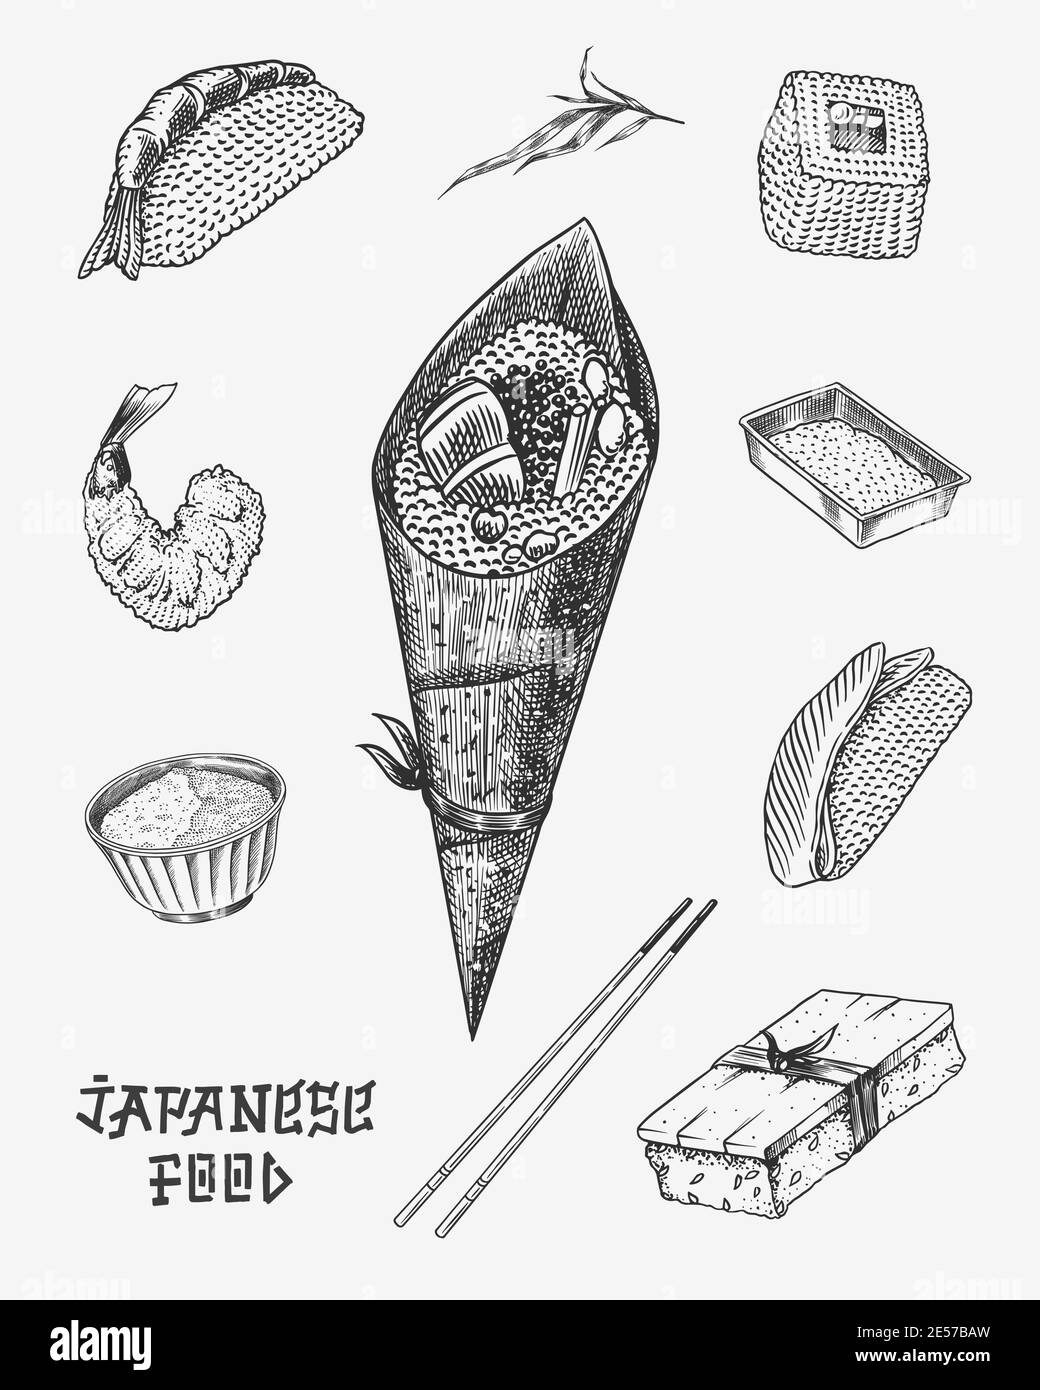 Japanese roll poster. Sushi bar, ramen noodles, soup in a bowl and dessert, Asian tea. Soy sauce. Hand holds chopsticks. Drawn engraved food sketch Stock Vector